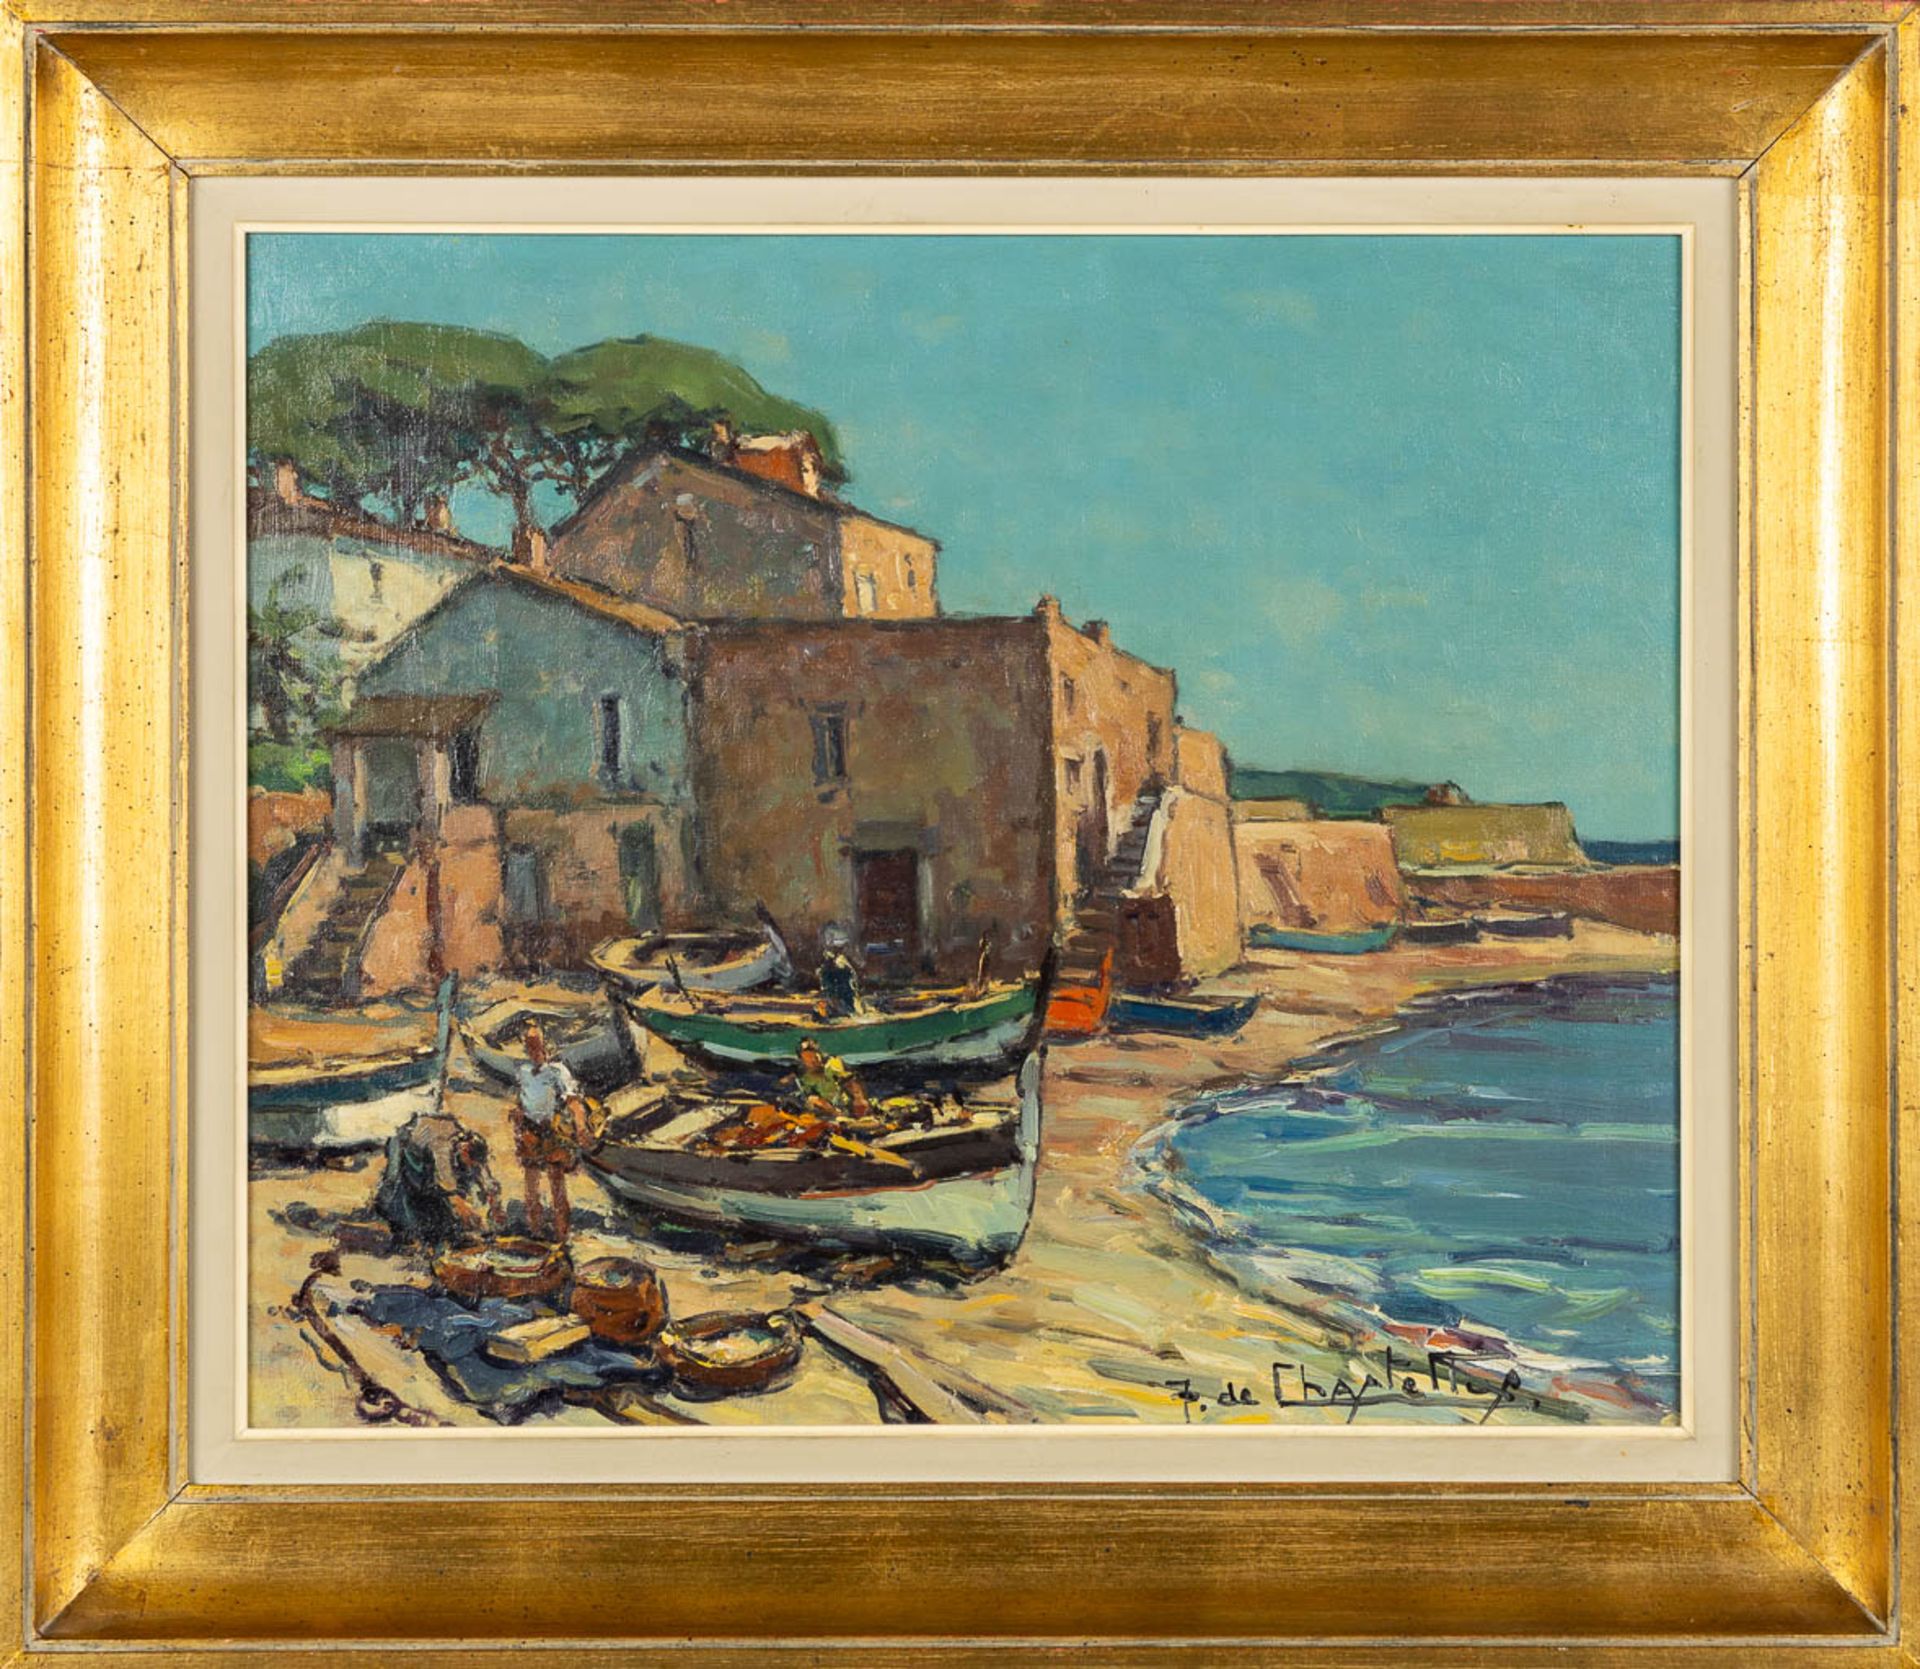 Jacques DE CHASTELLUS (1894-1957) 'Fishingboats on the beach' oil on canvas. (W:60 x H:50 cm) - Image 3 of 6